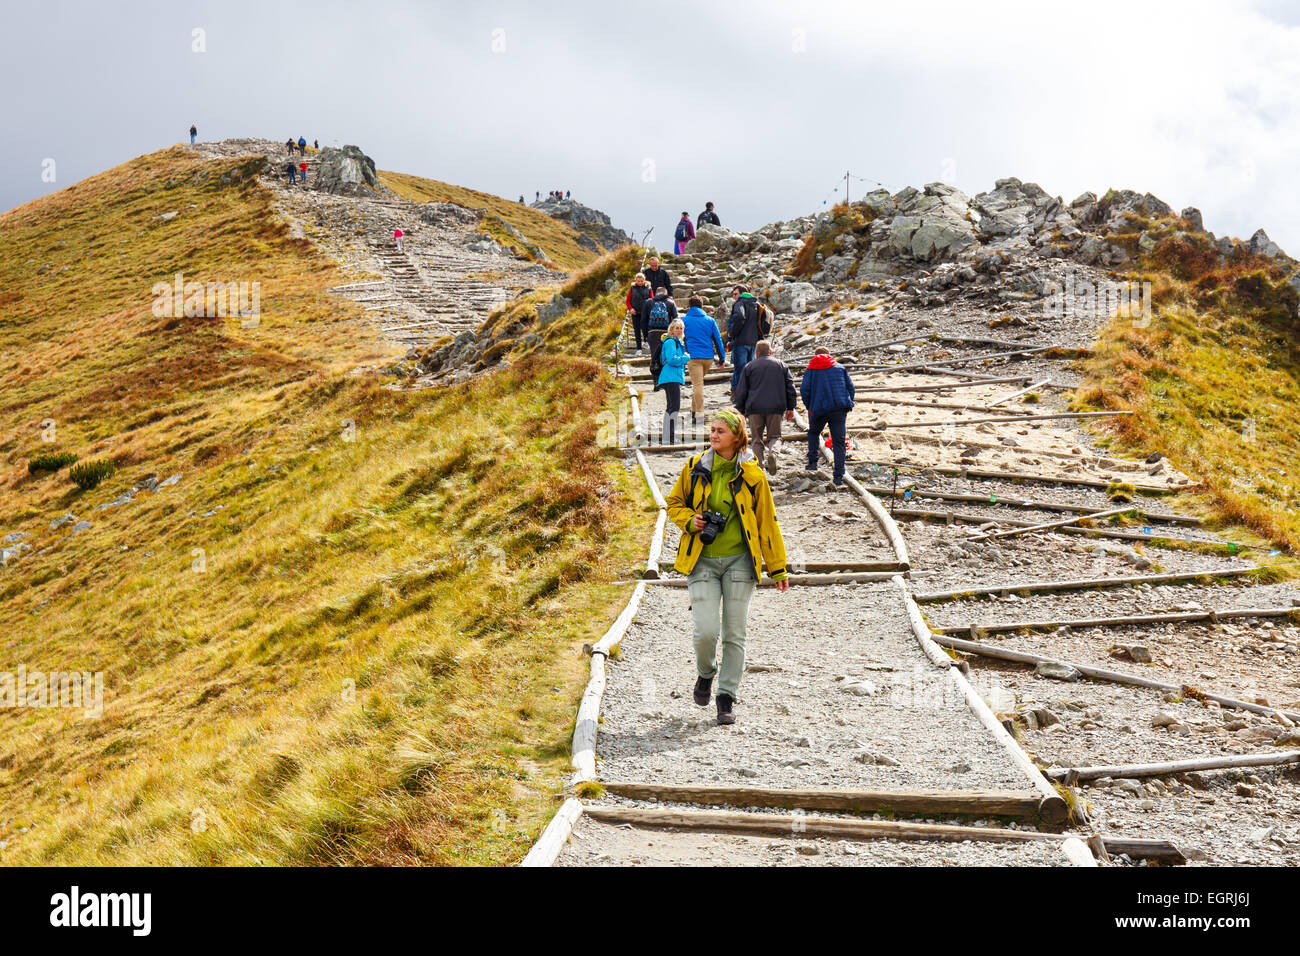 Zakopane, POLAND - September 13: Group of tourists walk to the top of the Kasprowy Wierch in Tatra Mountains on September 13, 20 Stock Photo